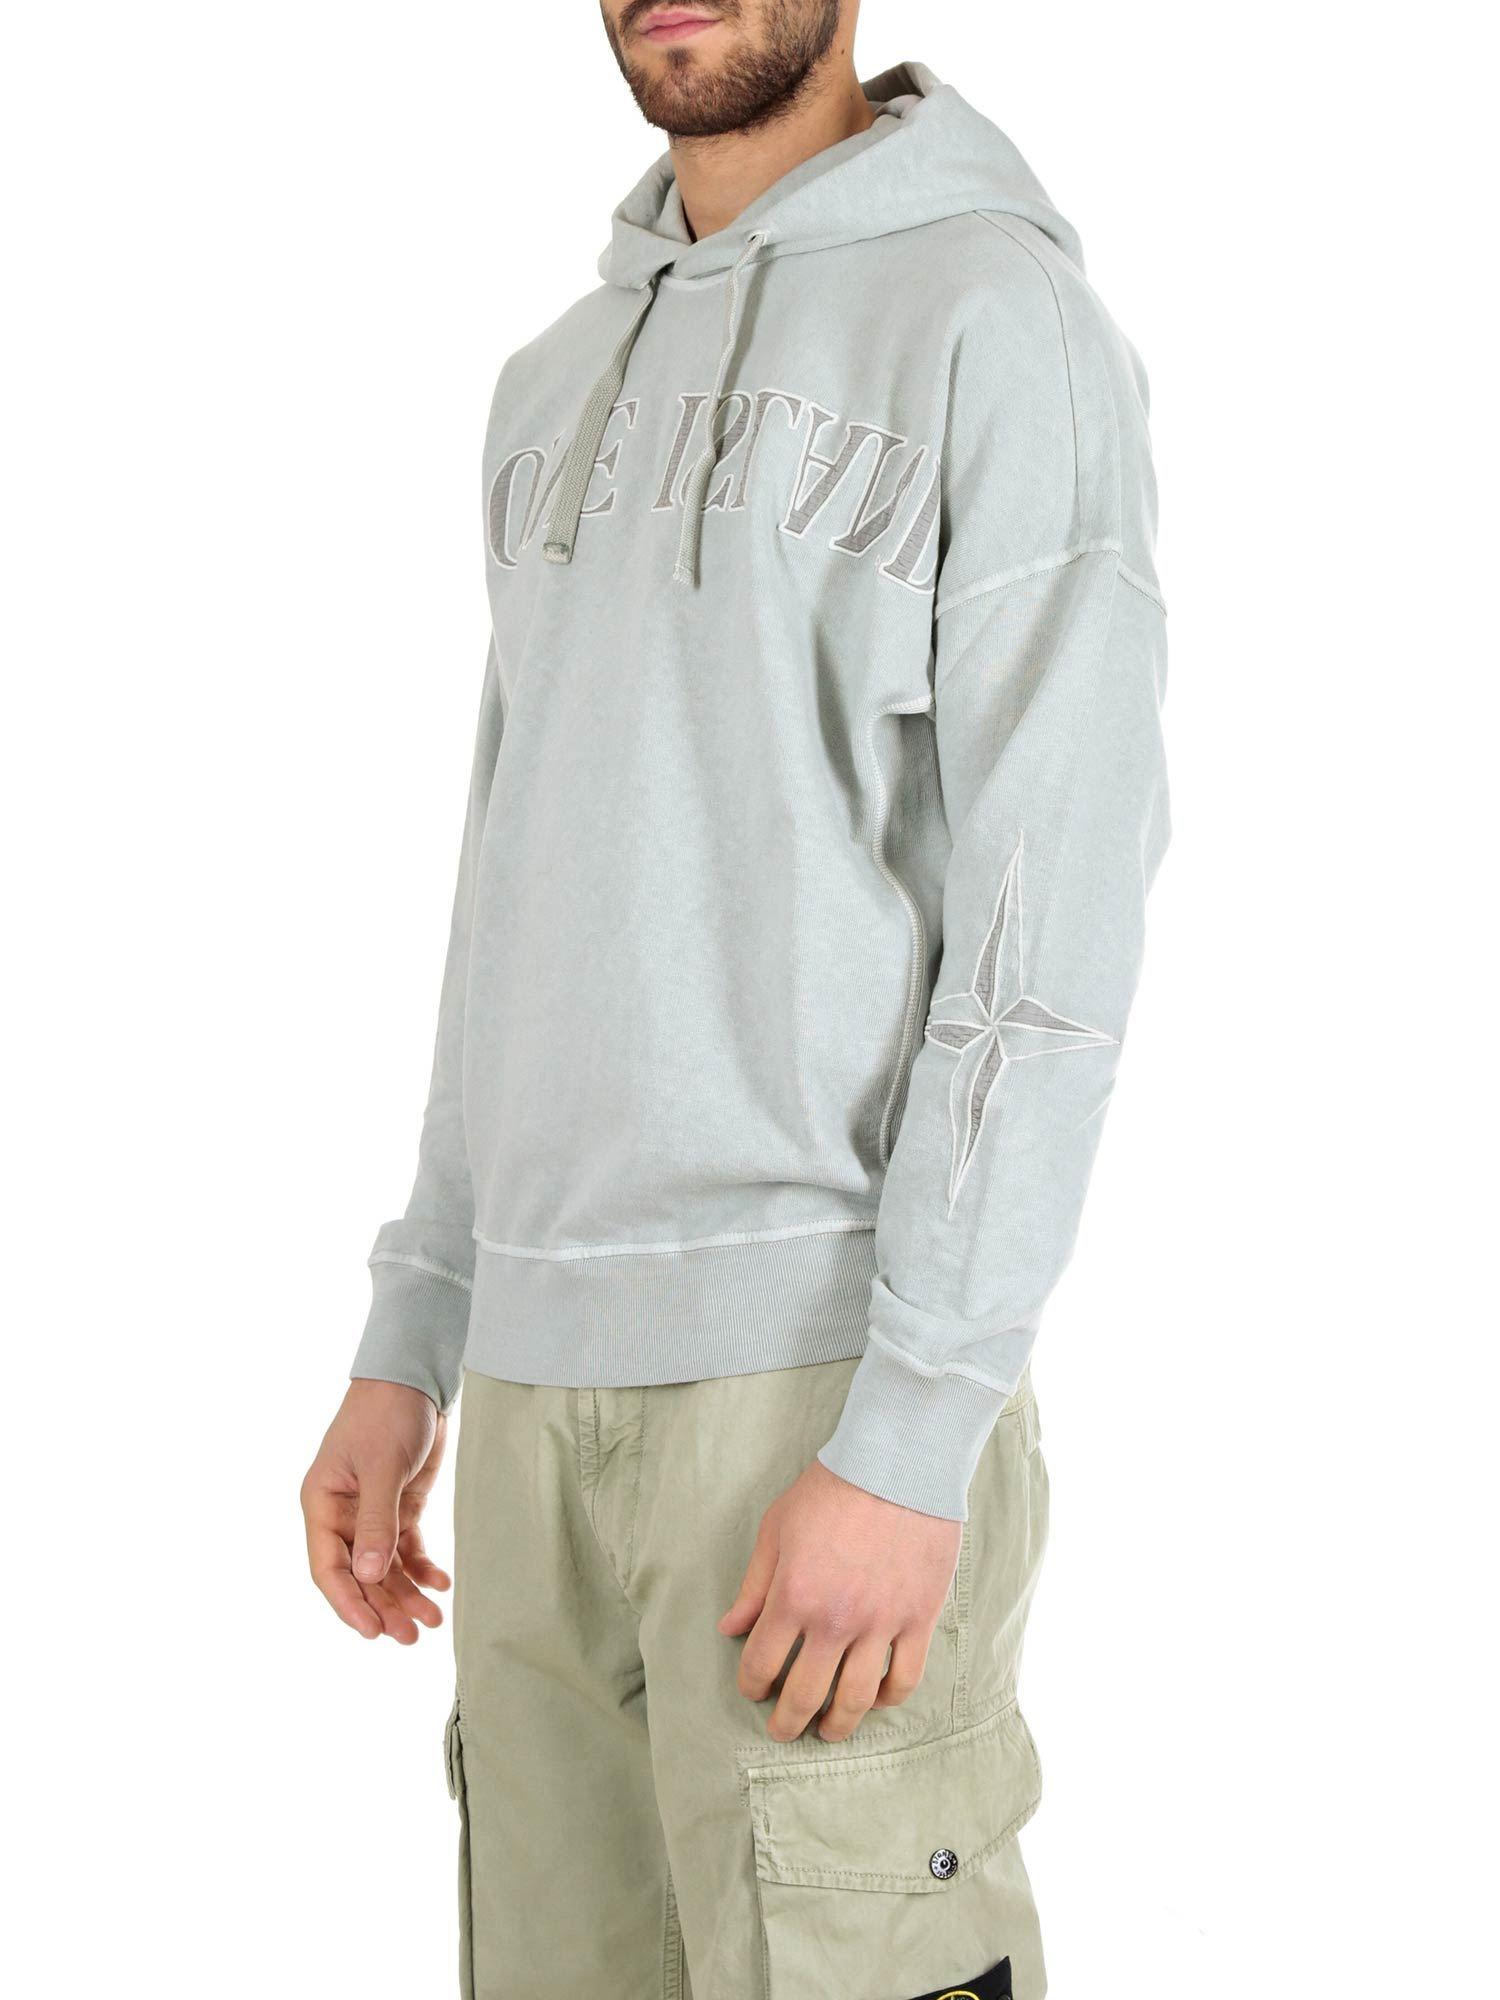 Stone Island Cotton Grey Hoodie With Reverse Logo in Gray for Men - Lyst